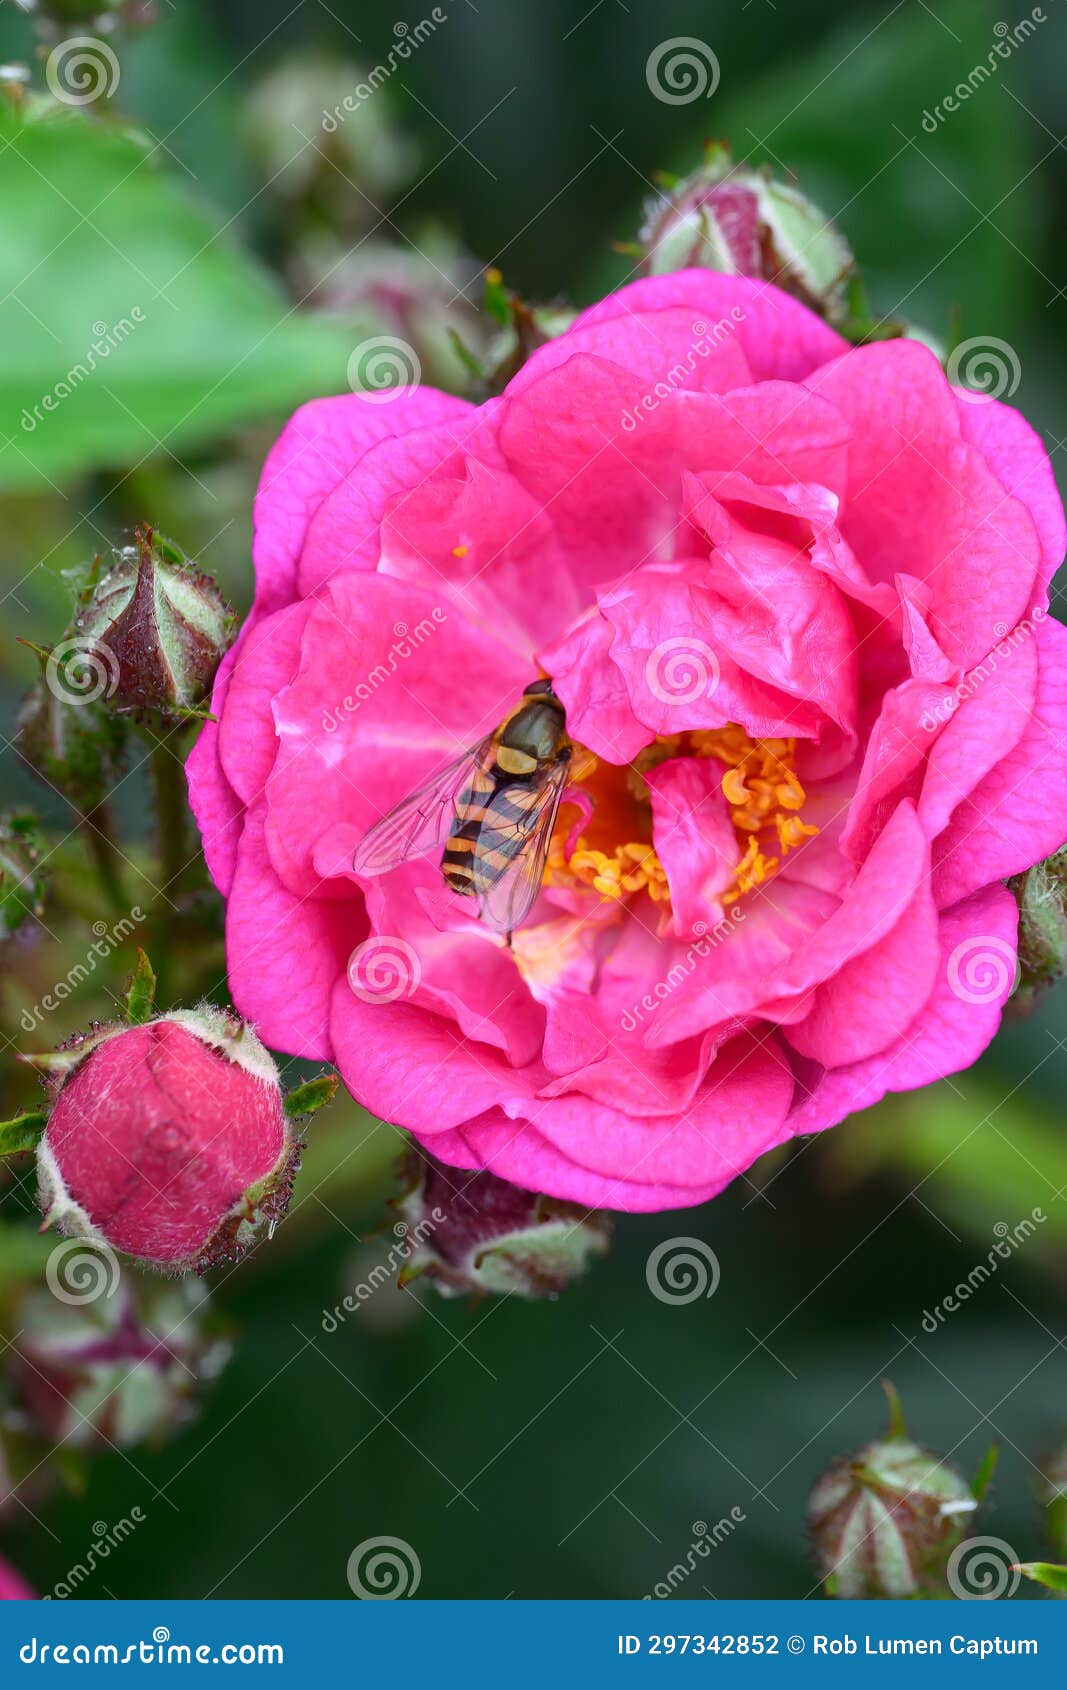 rambler rose rosa perfumy siluetta, double pink-violet flower with hoverfly